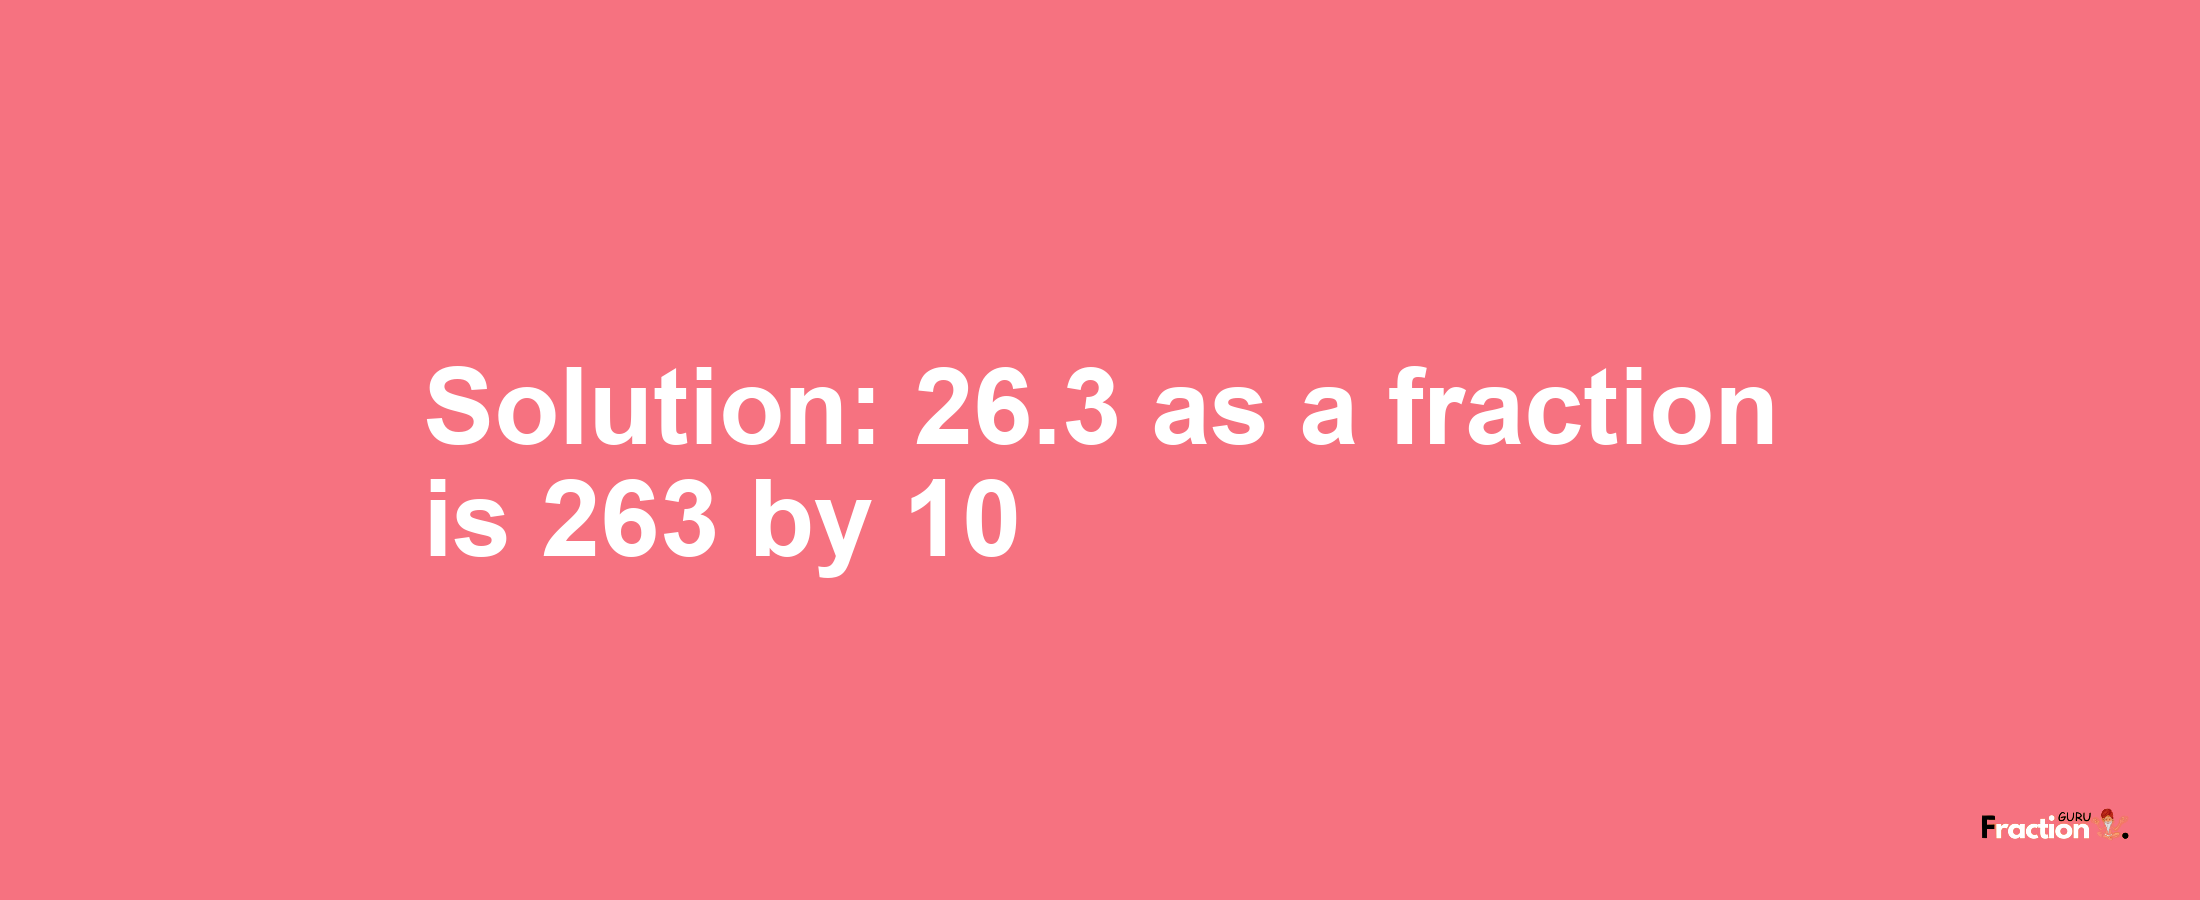 Solution:26.3 as a fraction is 263/10